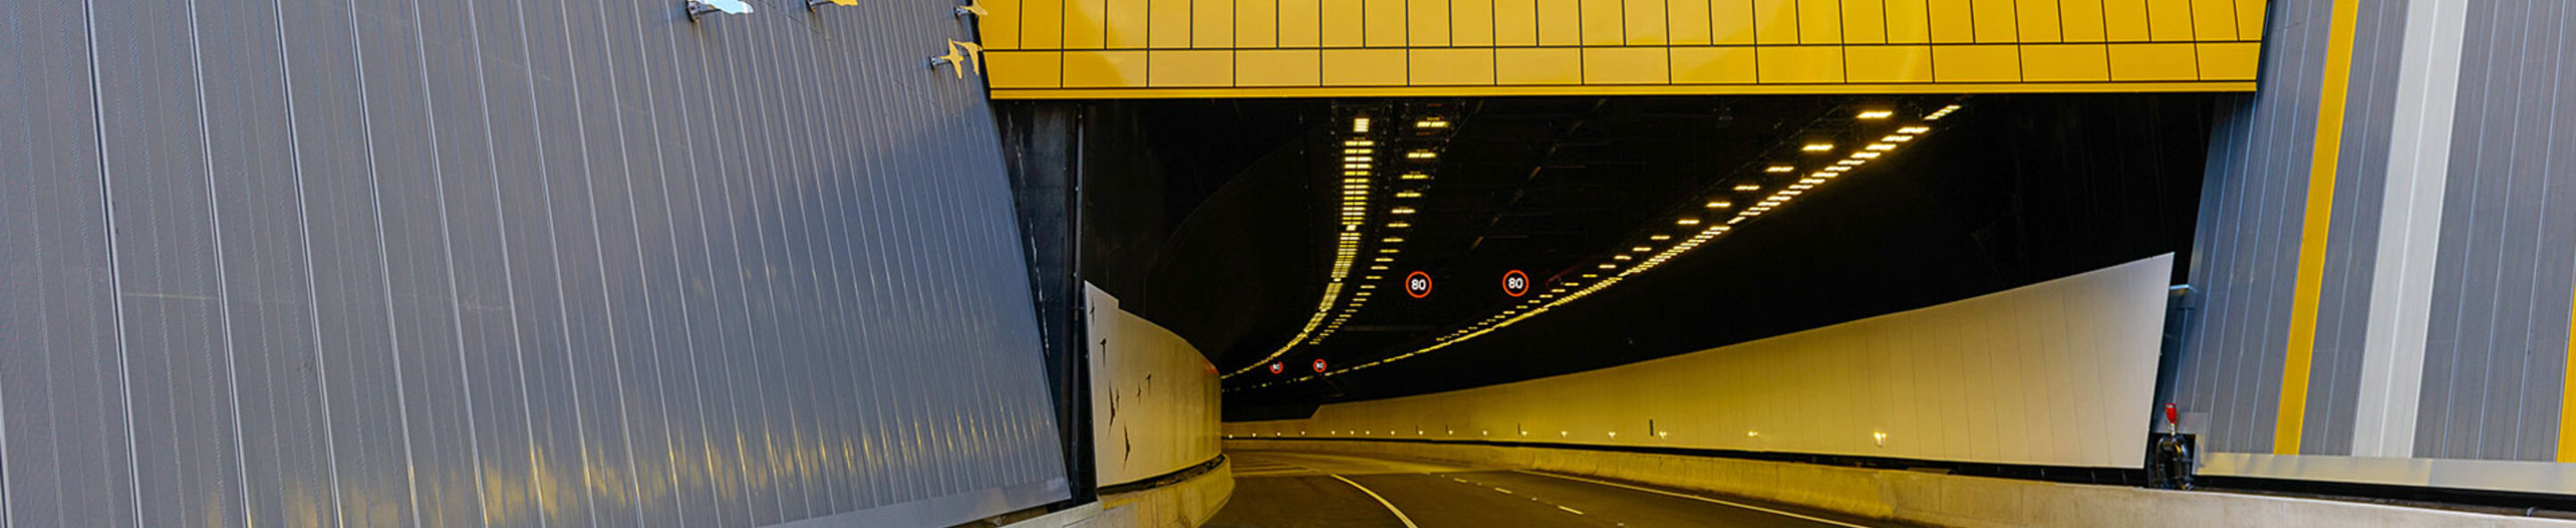 NorthConnex tunnel